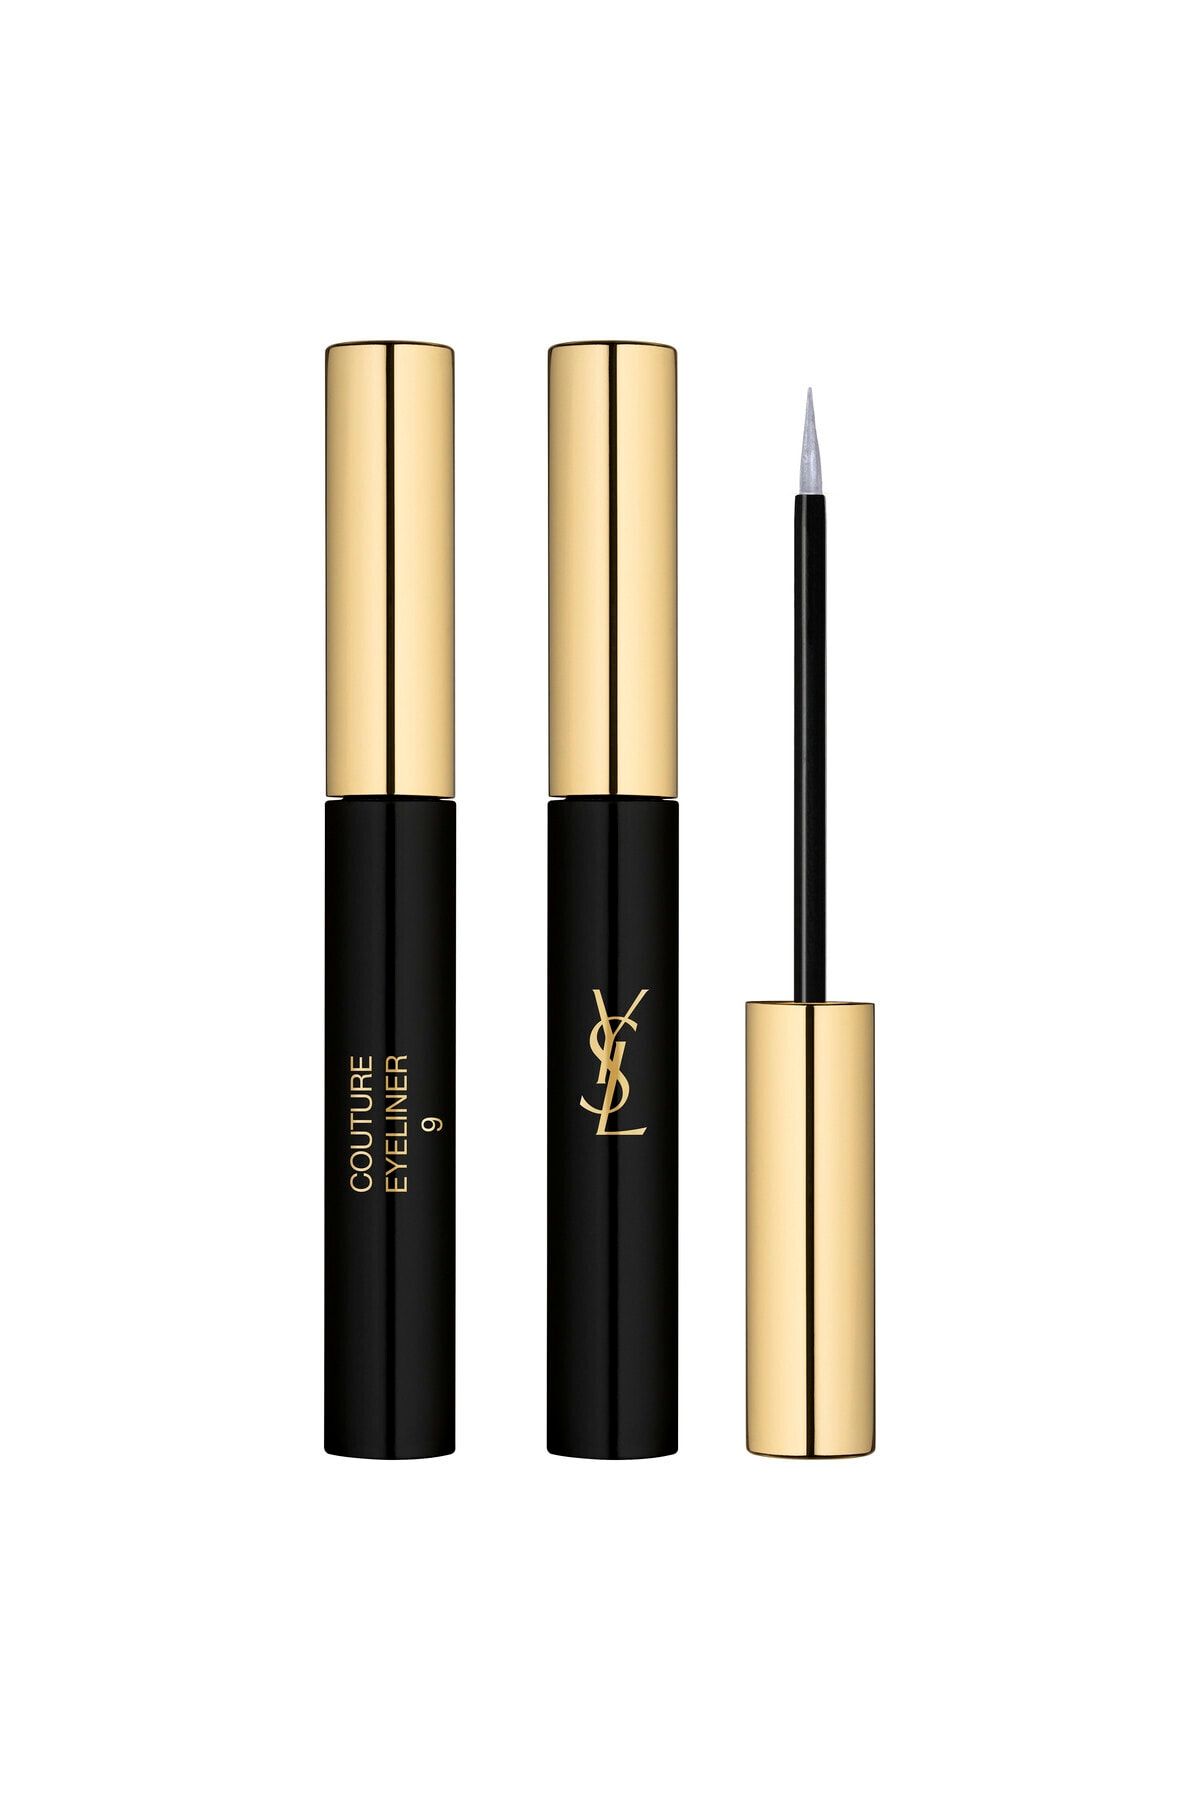 Yves Saint Laurent Couture Eyeliner Likit 16 - Outrageous Silver 3614272579378